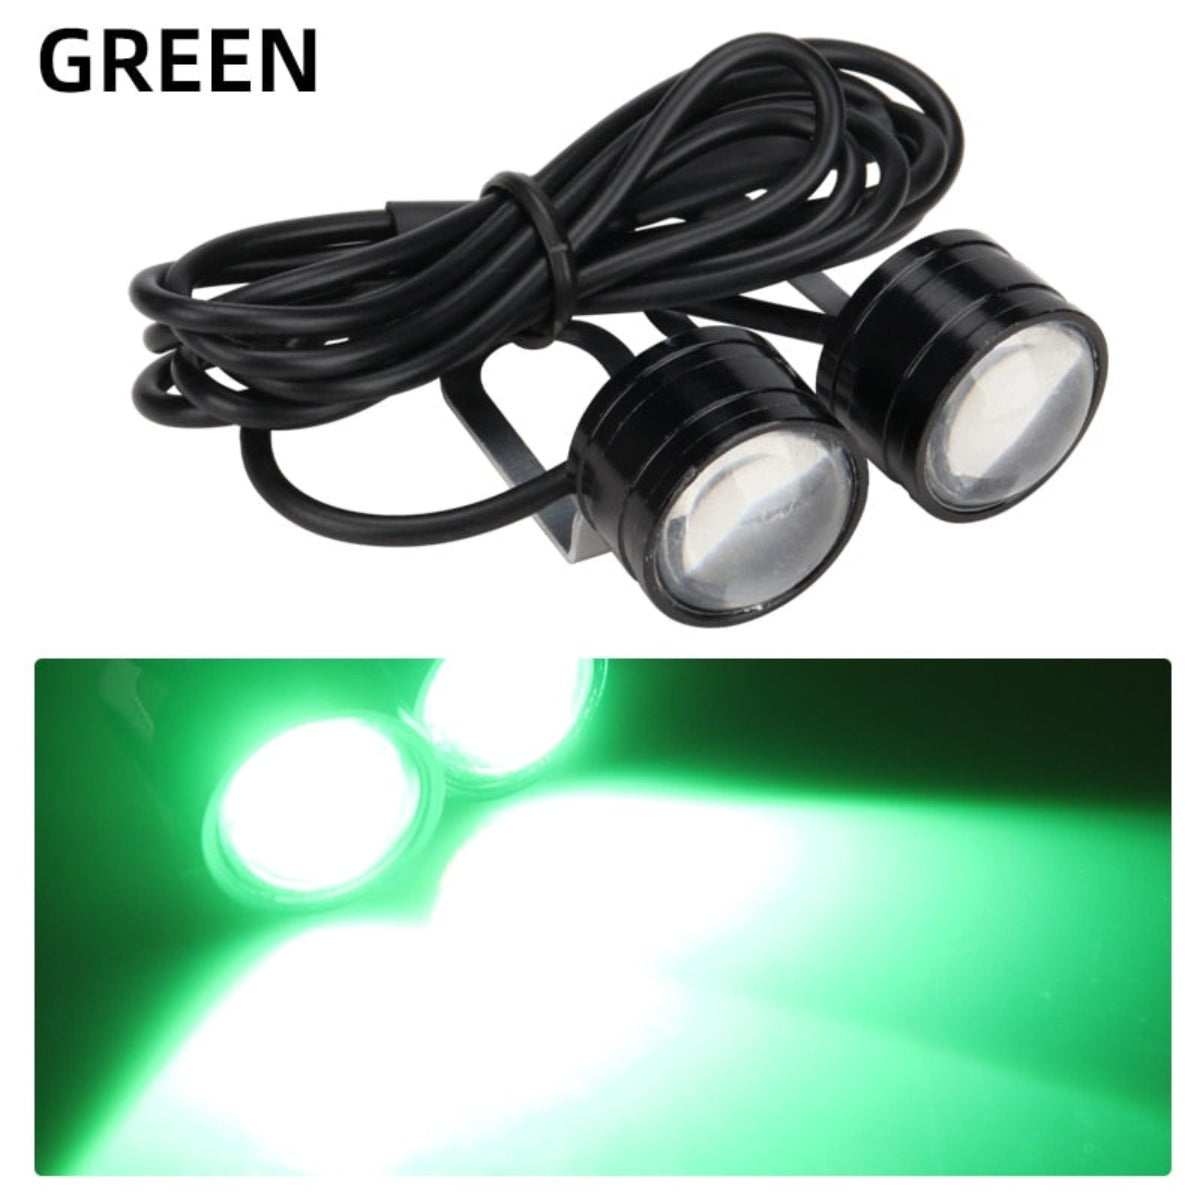 Enhance motorcycle visibility with a pair of Motorcycle Strobe LED Driving Lights for enhanced safety.